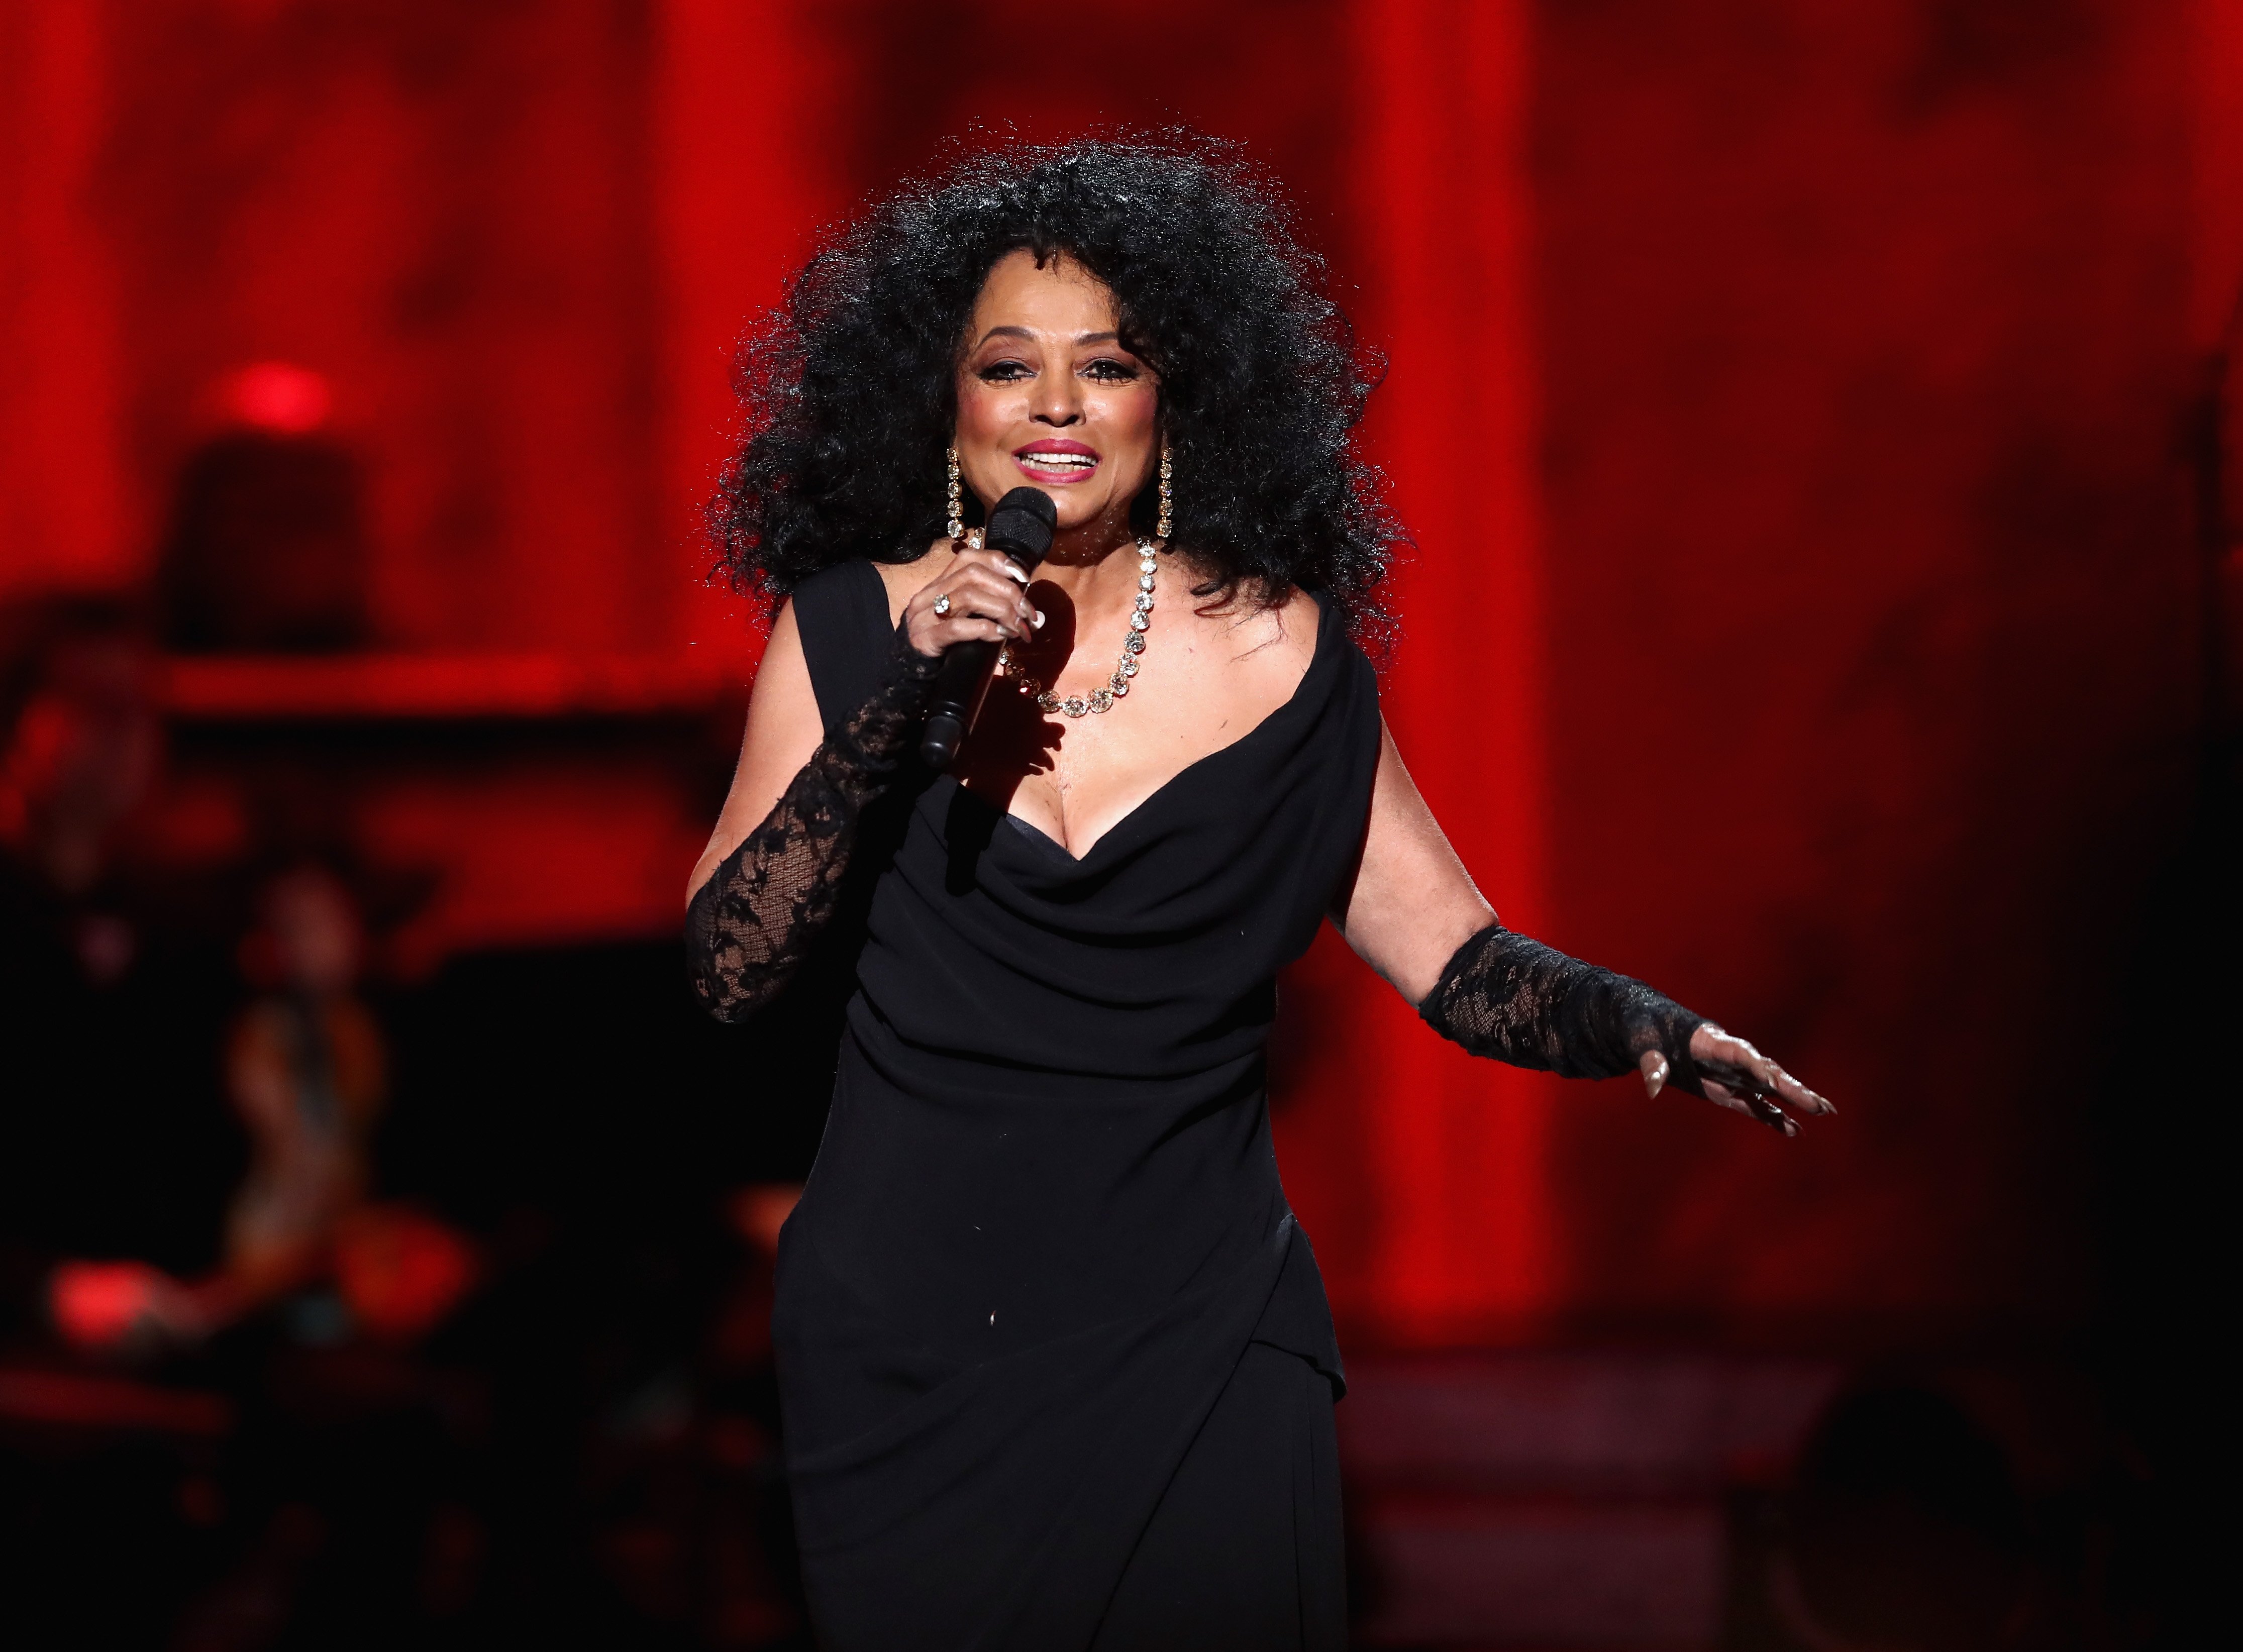 Diana Ross performs onstage during "Motown 60: A GRAMMY Celebration" at Microsoft Theater on February 12, 2019. | Photo: Getty Images.